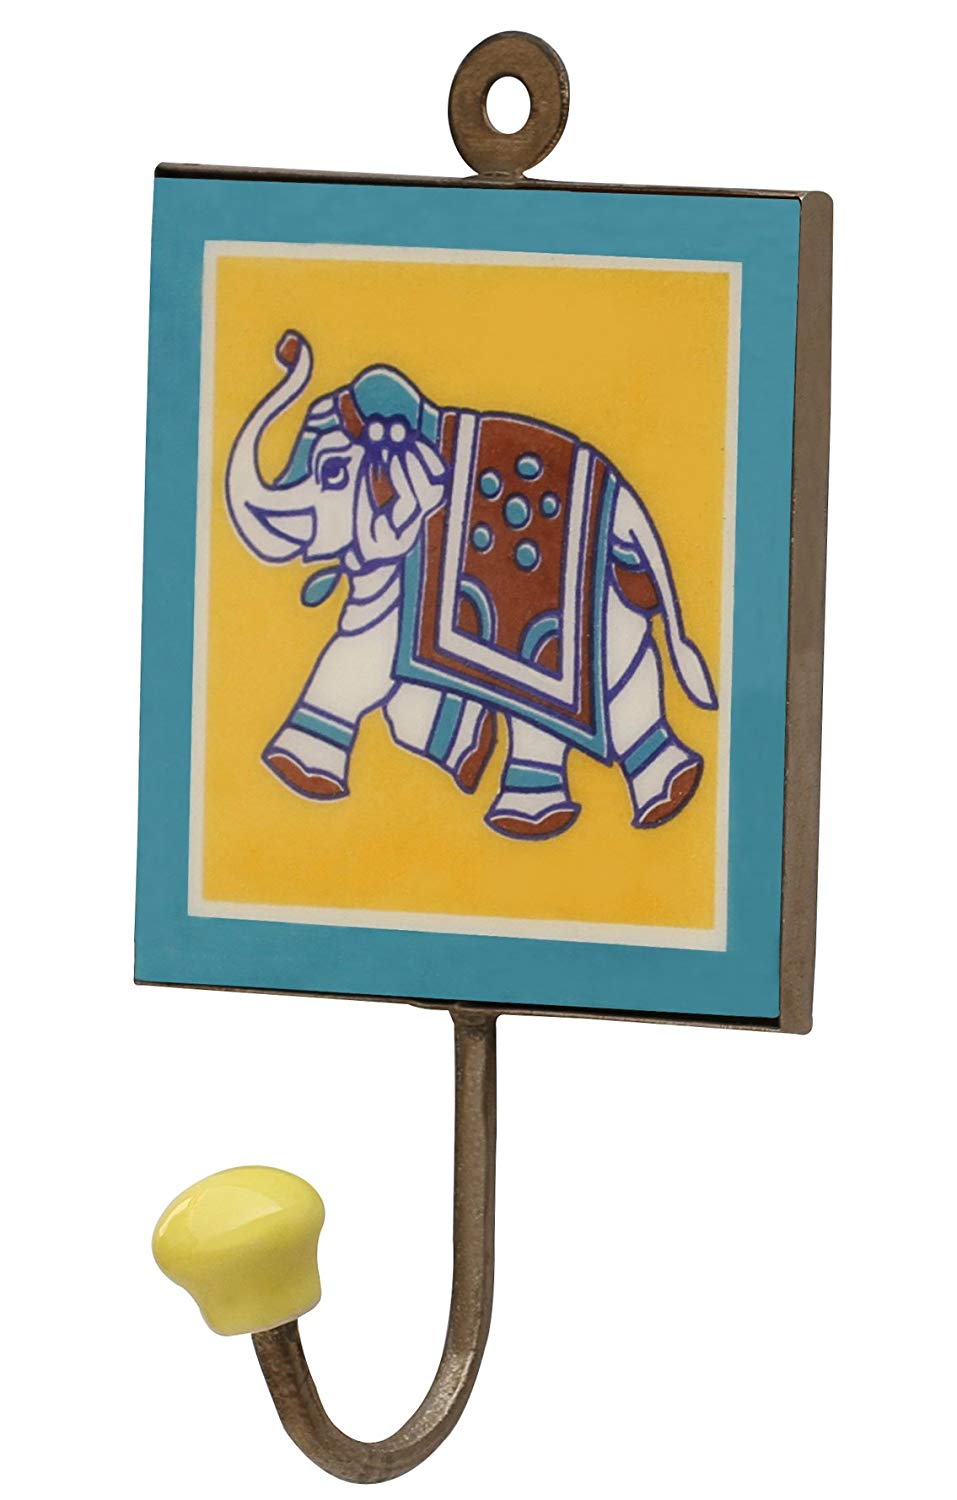 SouvNear 4" Ceramic Coat and Hat Hook Mothers Day Gifts - Elephant Design Wall-Mounted Yellow & Blue Single Hook in Ceramic and Mtal - Decorative Hooks For Hanging - Antique-Look Wall DÃ©cor